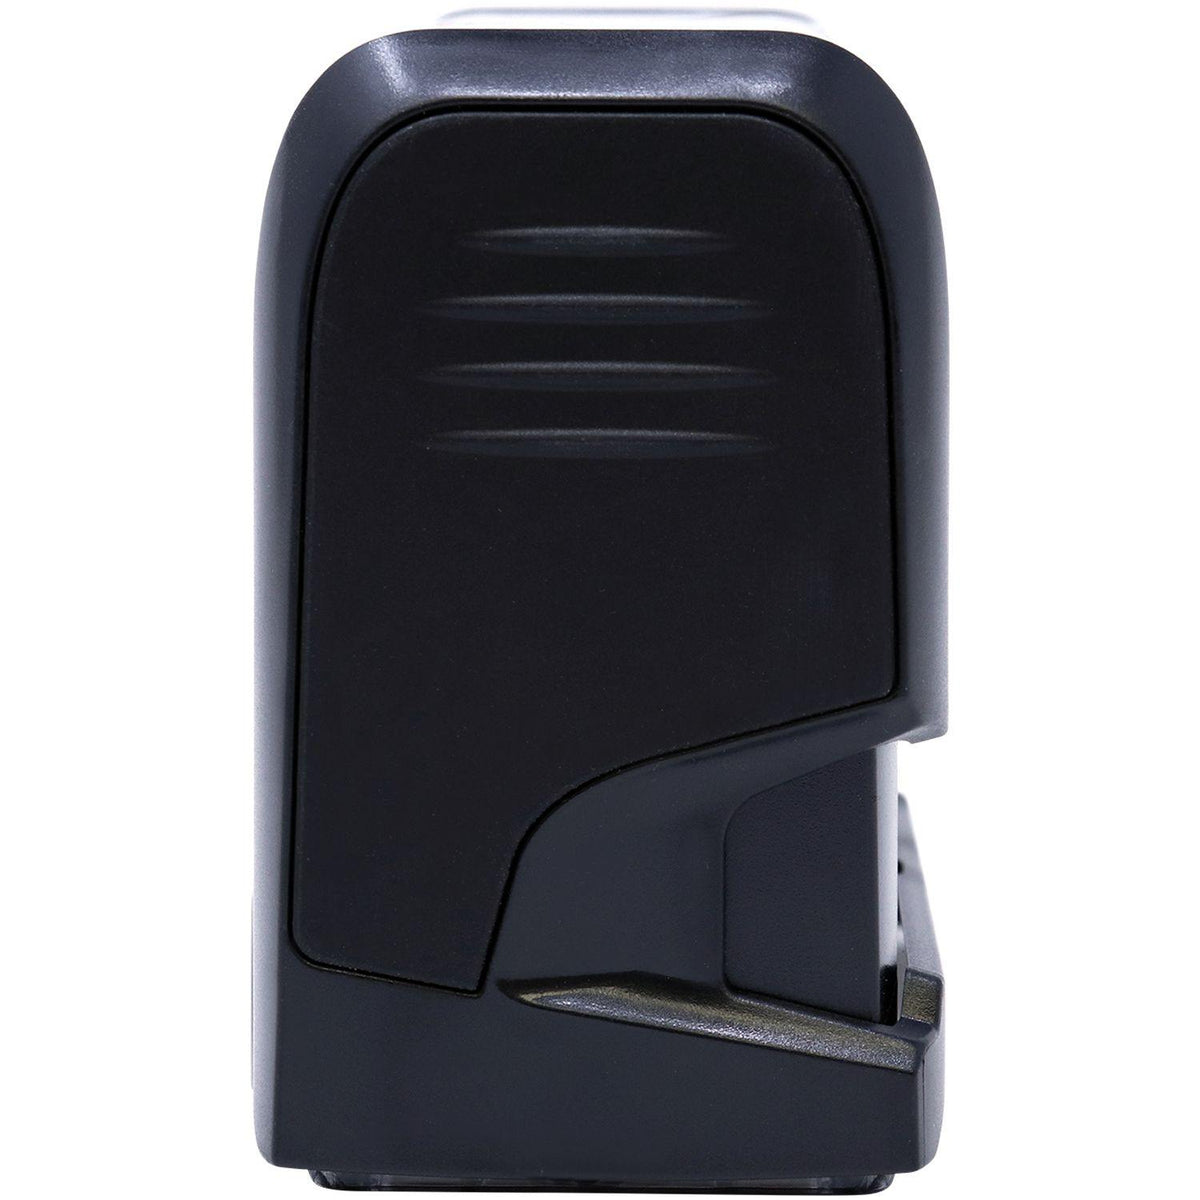 Large Self-Inking Contact Tracing Stamp Closed Mount